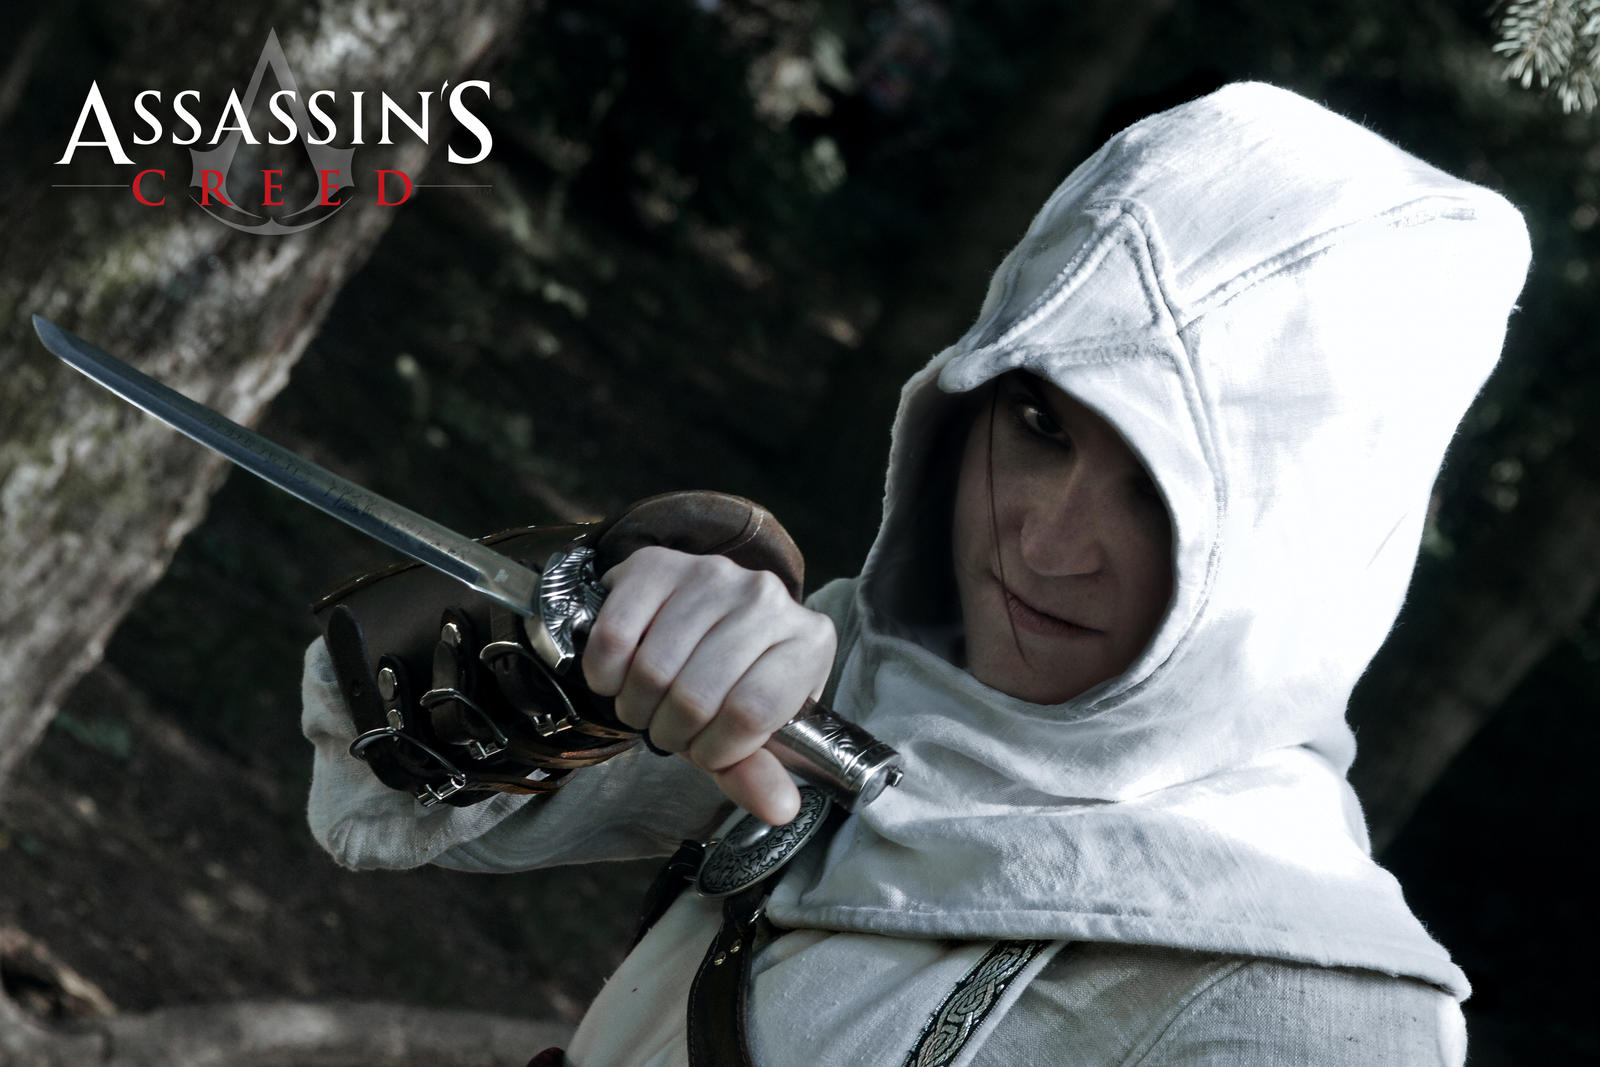 Assassins Creed - The man in the white hood